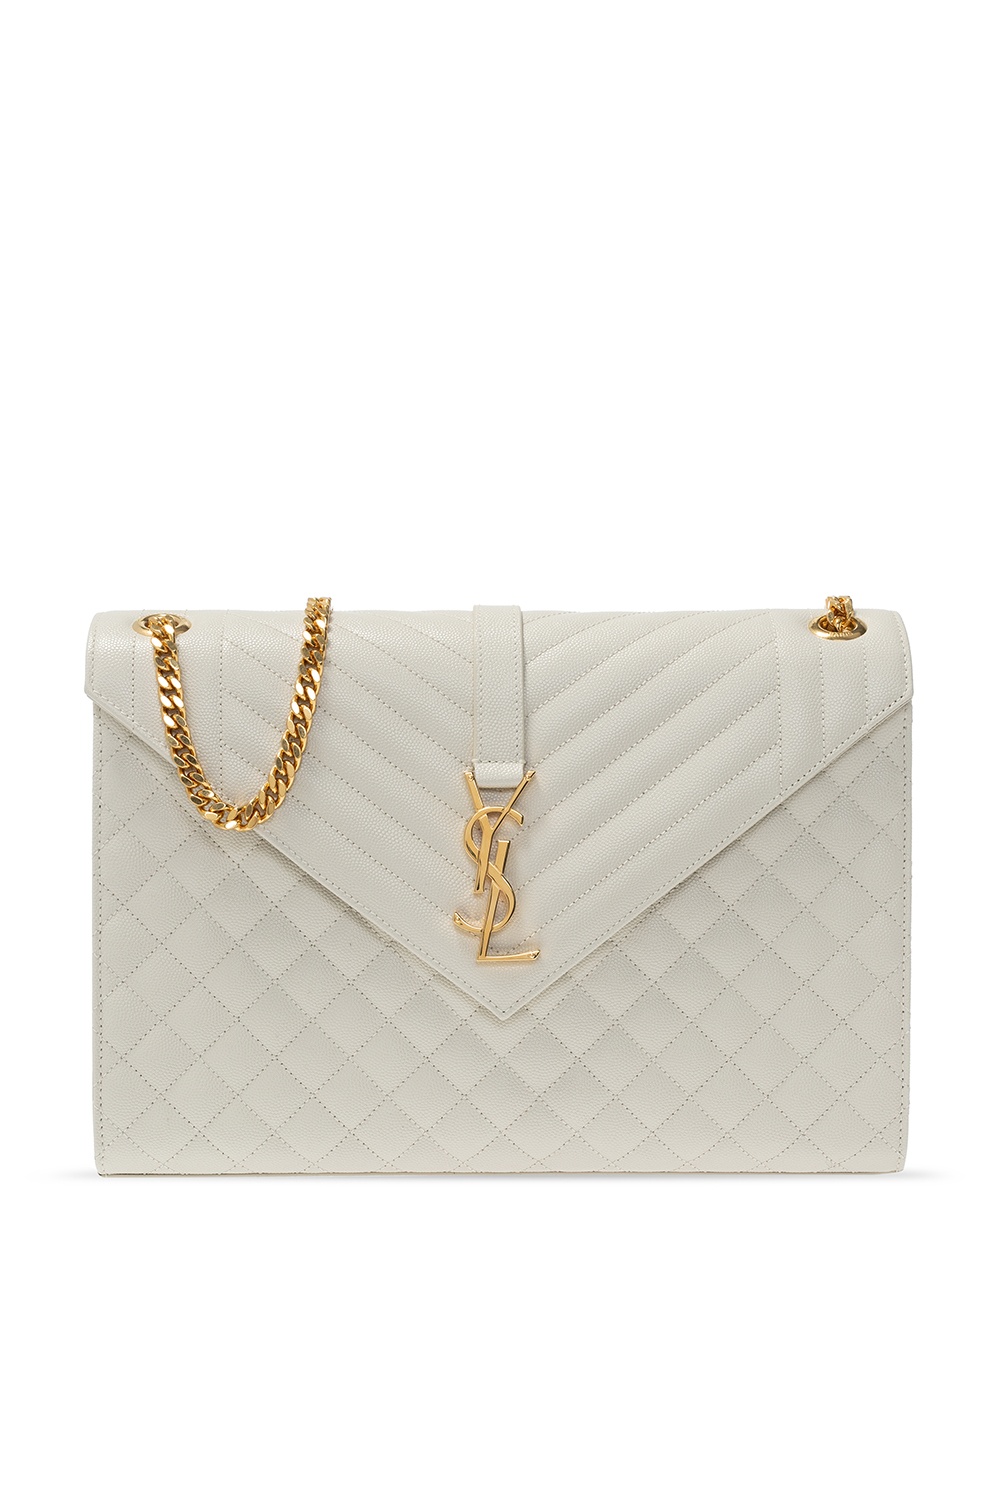 IetpShops GB - From hair and makeup to her Saint Laurent outfit - White ' Envelope' shoulder bag Saint Laurent